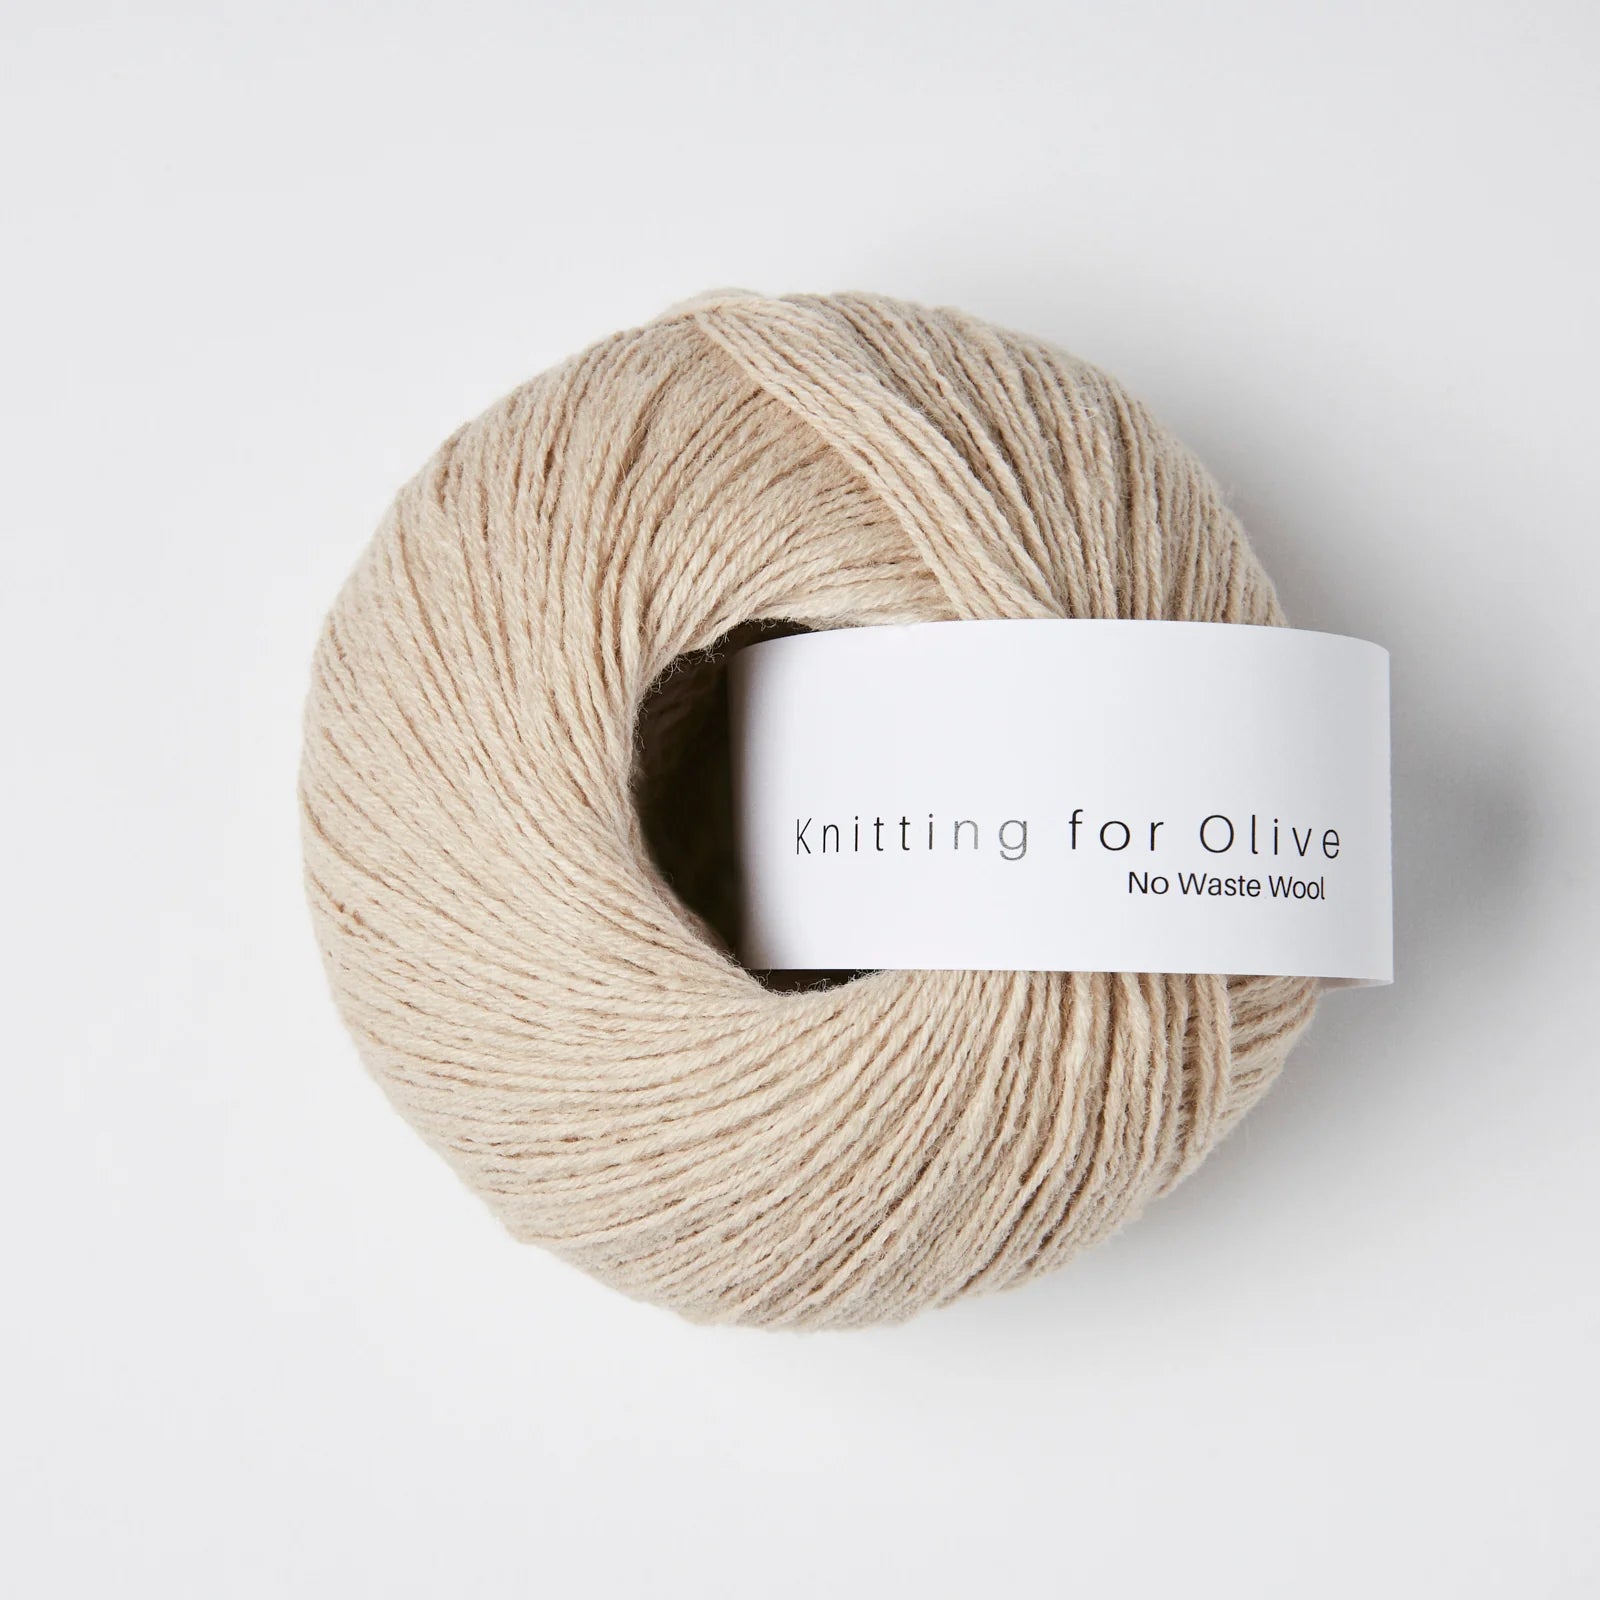 Knitting for Olive No Waste Wool - Knitting for Olive - Powder - The Little Yarn Store